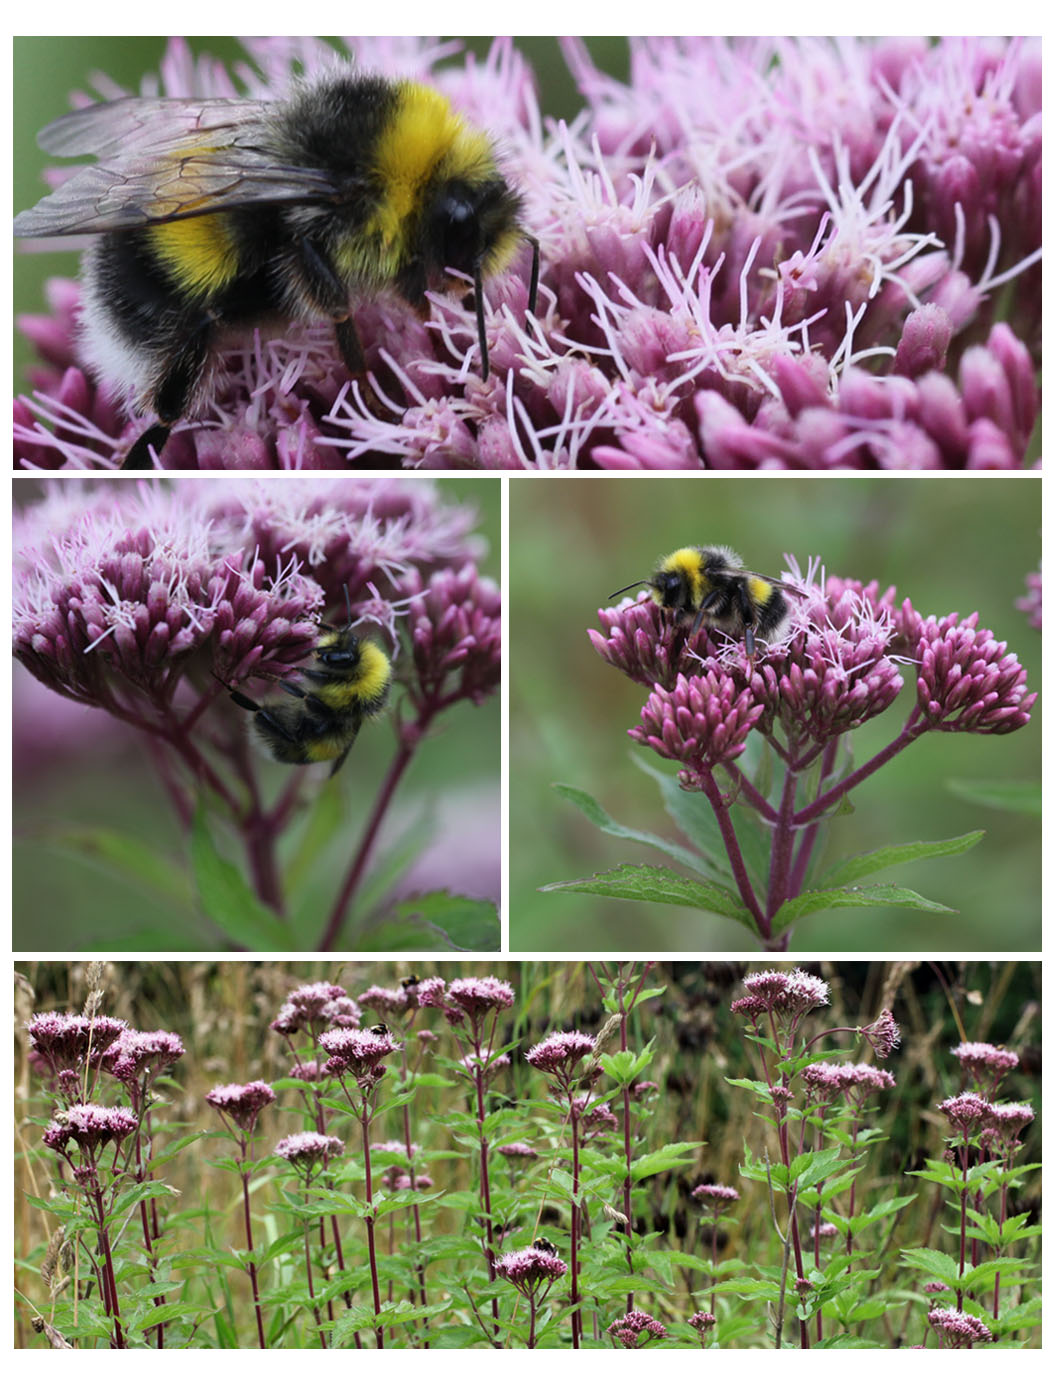 Hemp-agrimony and bumble bees in the Garden 2013 (Squire)